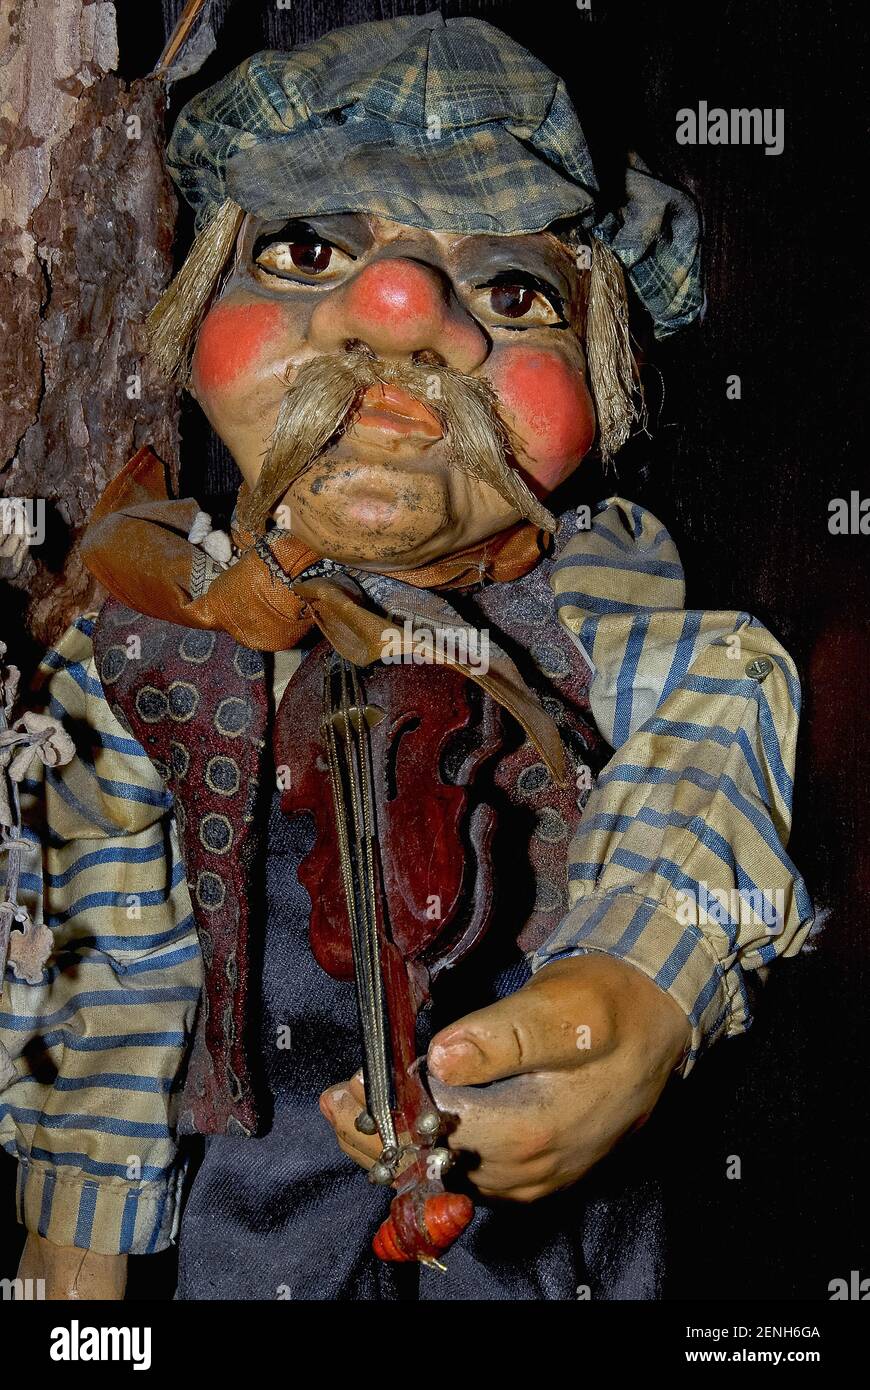 This peasant fiddler with soulful eyes, red cheeks and nose and a drooping walrus moustache wears a stained cloth cap, shirt and waistcoat as he prepares to serenade visitors to one of the traditional mannequin and puppet shops in Prague, capital of the Czech Republic or Czechia.  The male violinist is among many imaginative designs for puppets, marionettes and dolls on offer to visitors that help to maintain vibrant Bohemian folklore and craft traditions stretching back to at least the 1500s. Stock Photo